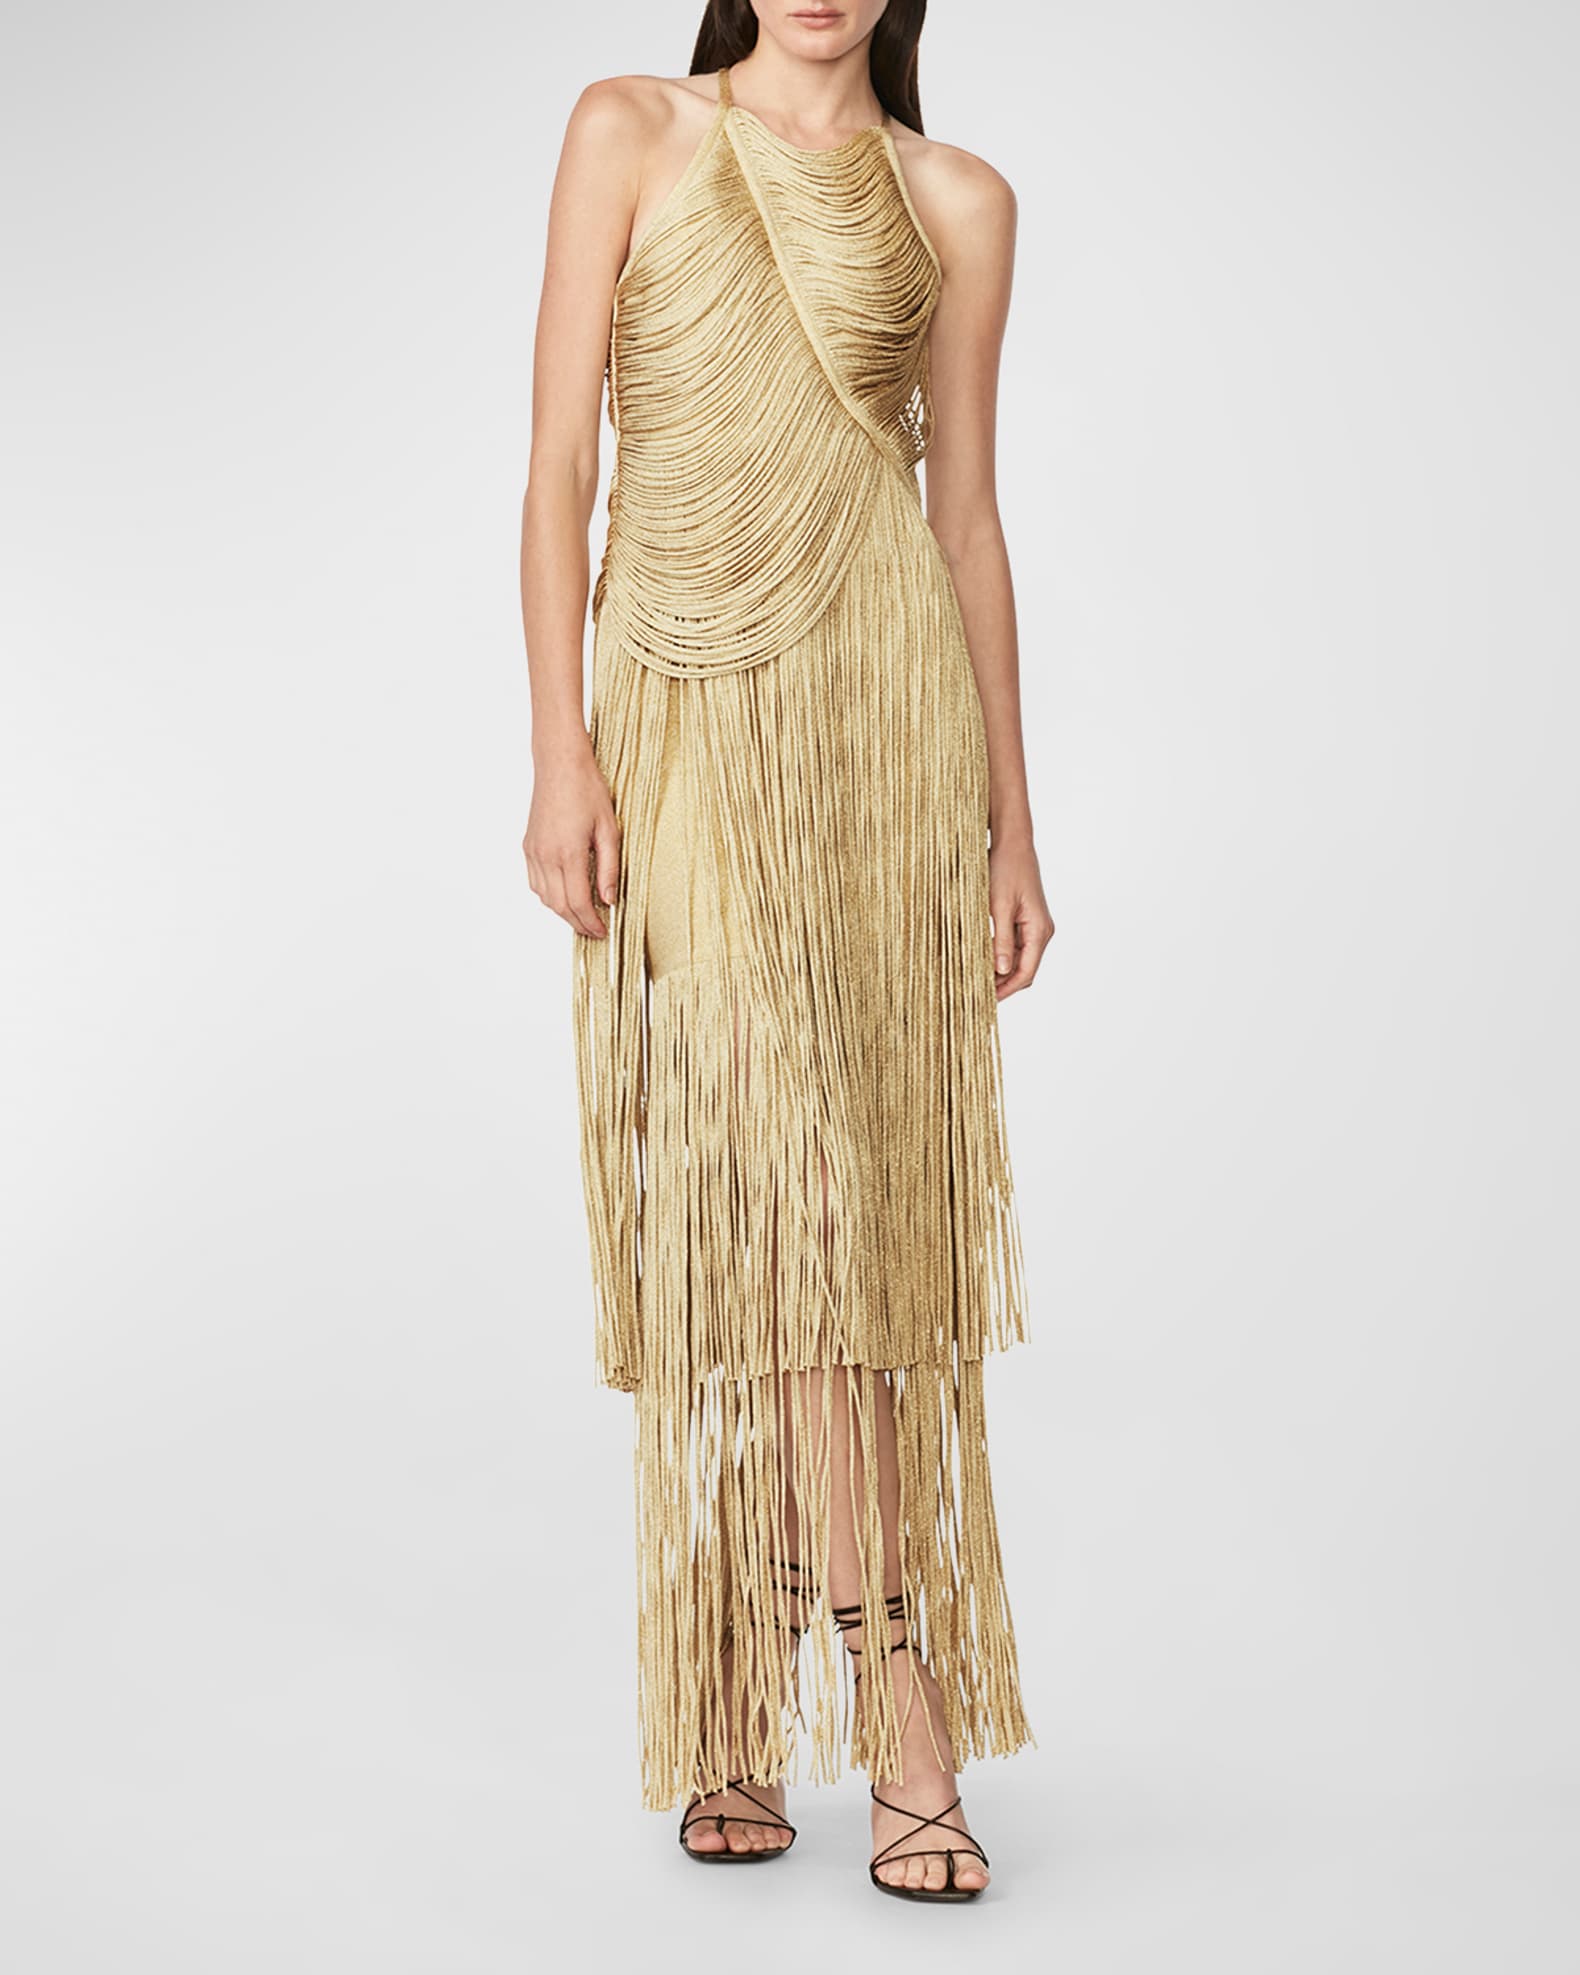 Herve Leger Recycled Metallic Fringe Draped Gown | Neiman Marcus